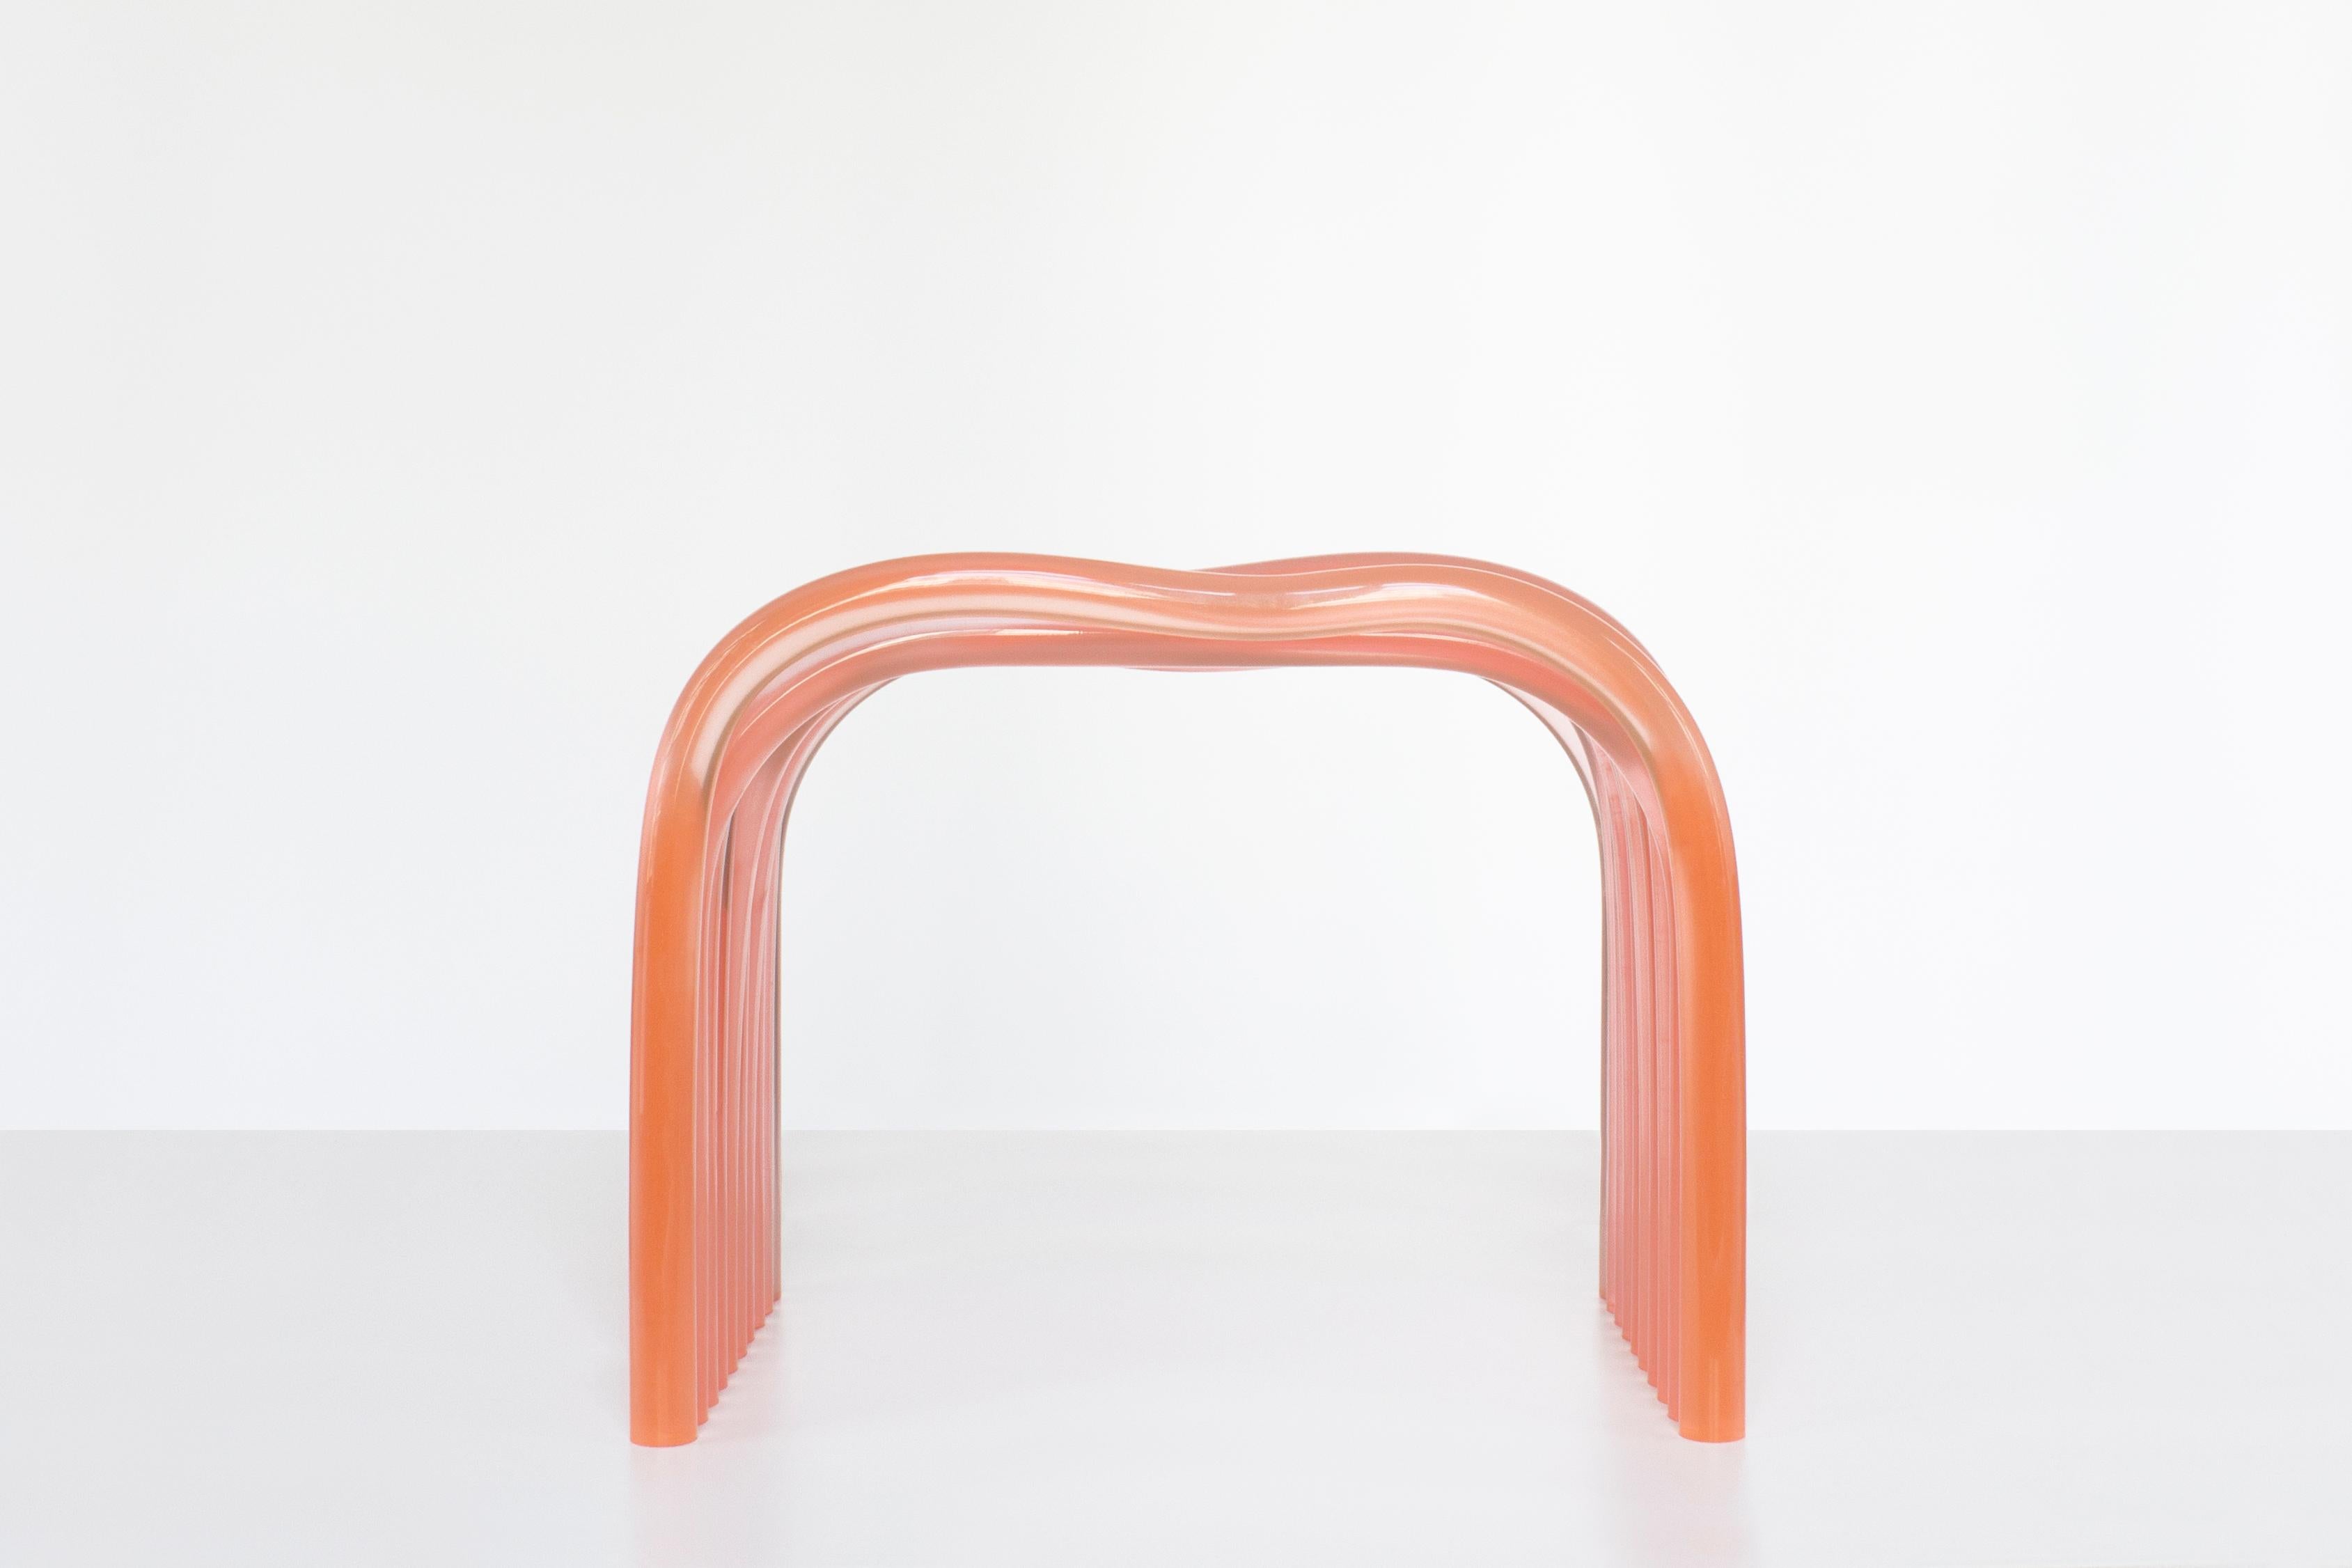 Boudins Stool in transparent resin is presented by Sabourin Costes, France, 2020

The stool is the central piece of the Boudins Collection, a series of handcrafted functional objects that surprise and stand out by their sculptural shapes and